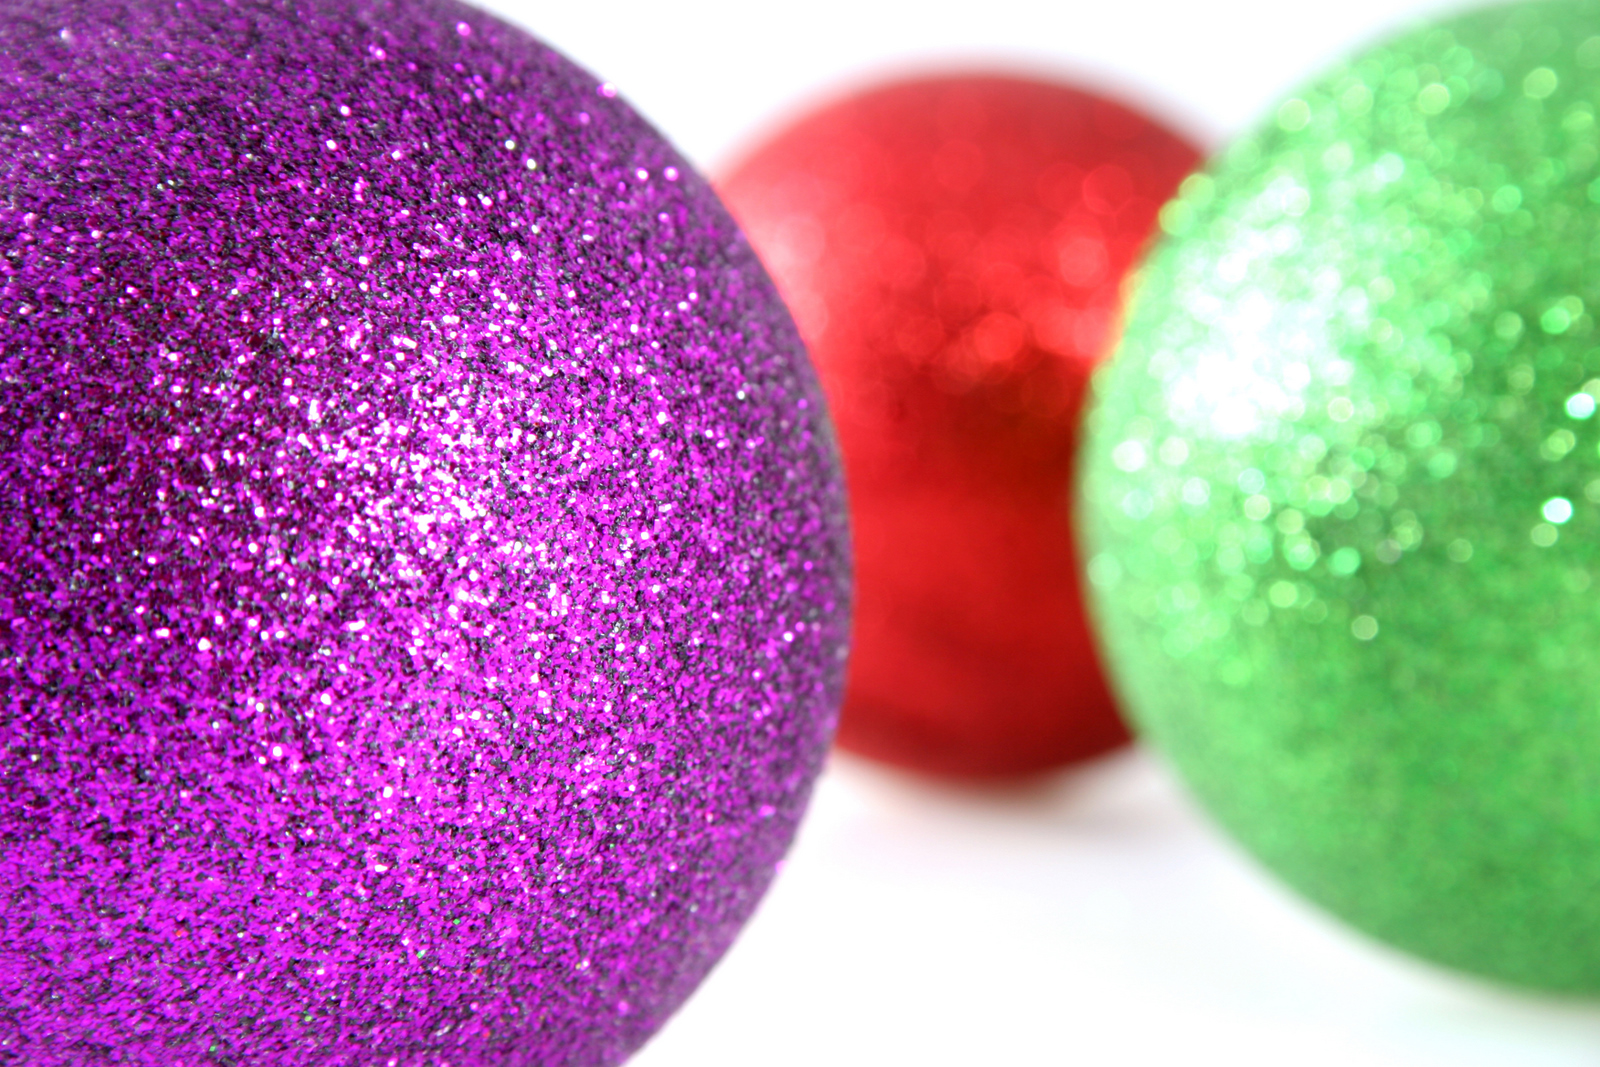 Christmas Decorations With Shallow Depth of Field